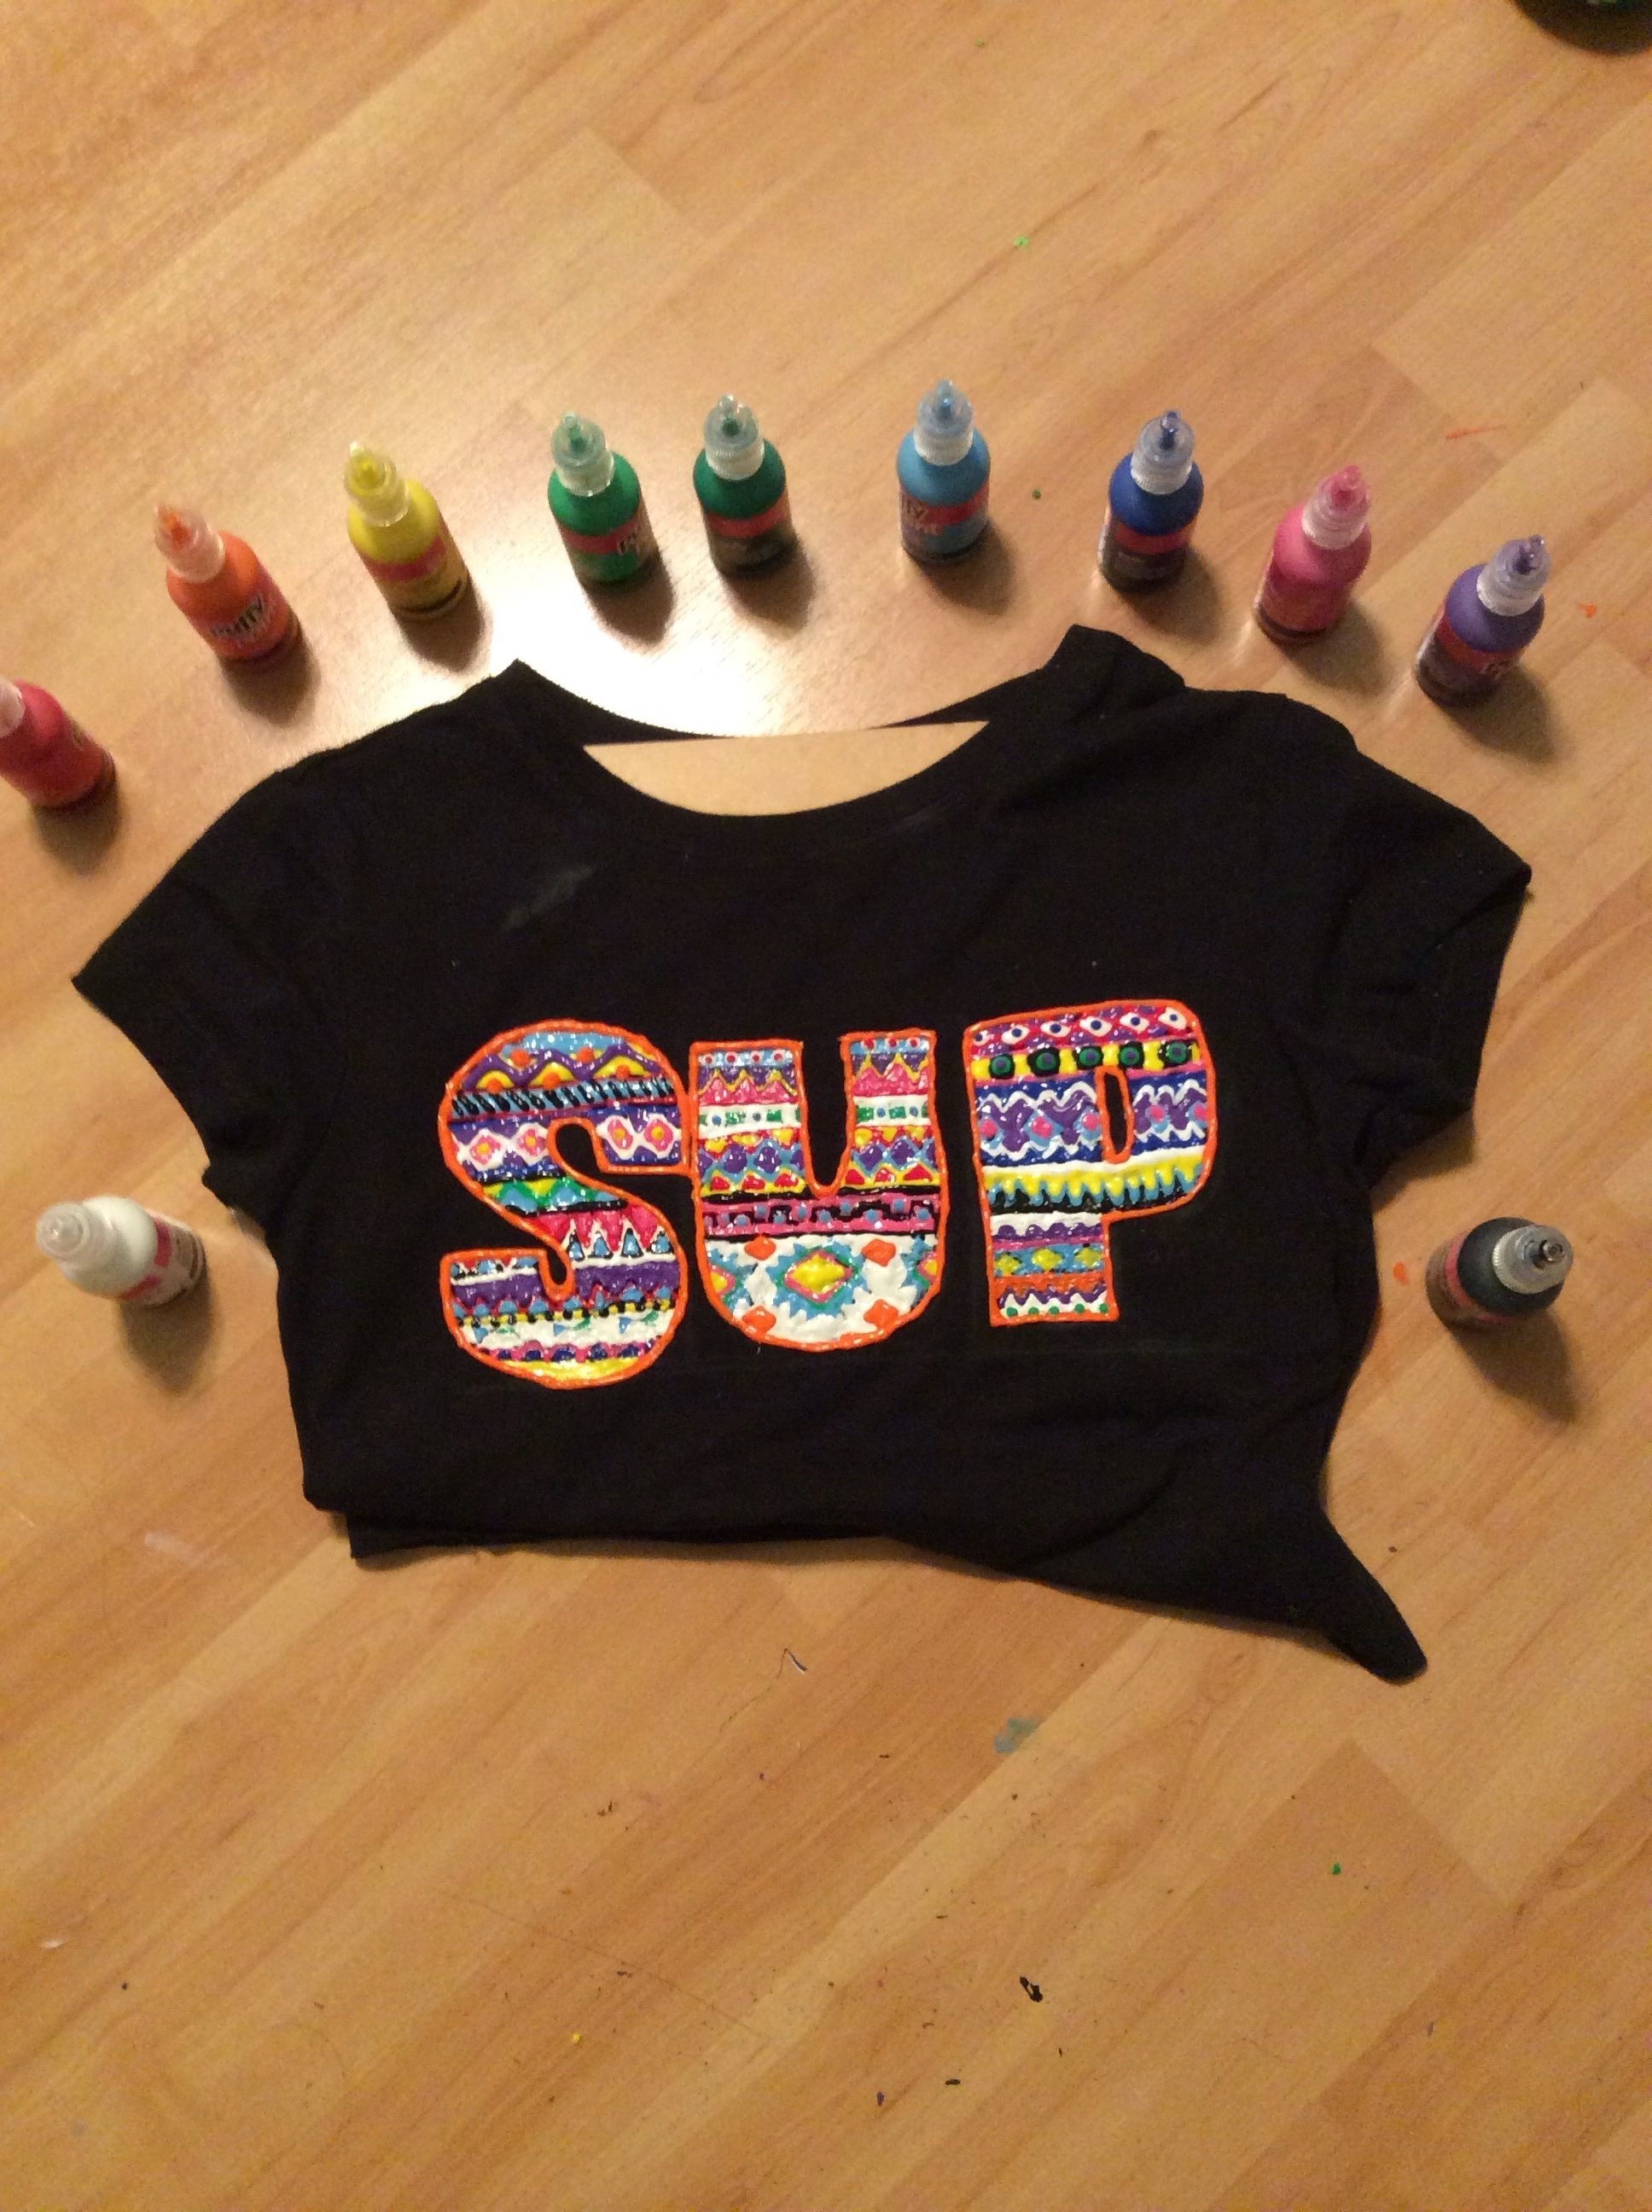 10 Stylish Puffy Paint T Shirt Ideas cute crop top with aztec print inside lettering my sister abigail 2022